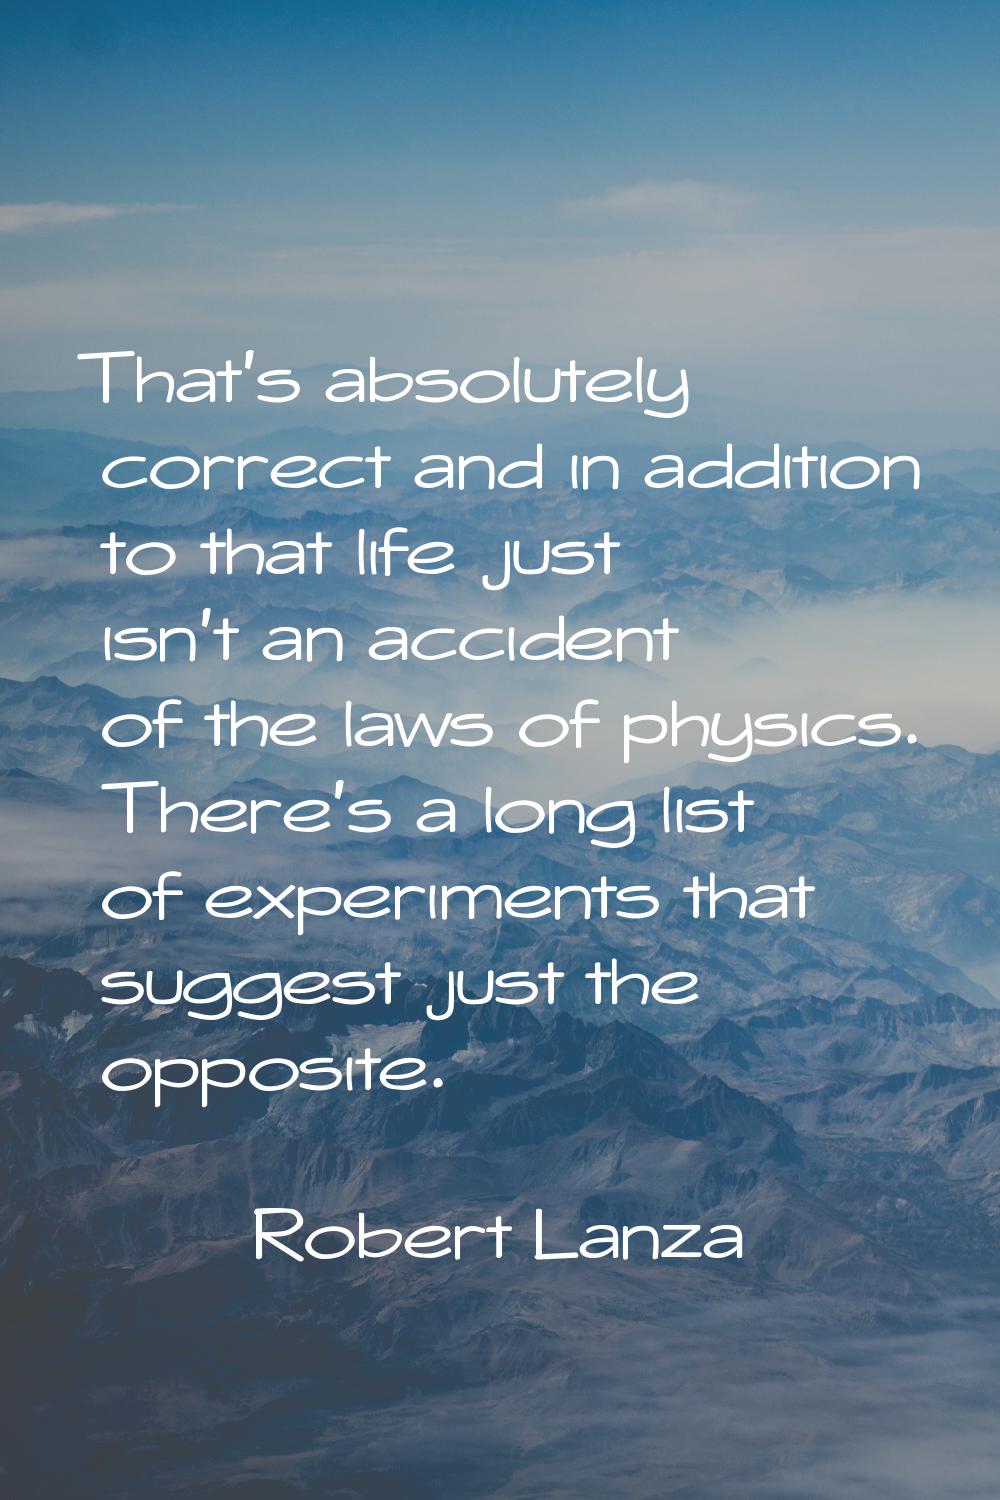 That's absolutely correct and in addition to that life just isn't an accident of the laws of physic